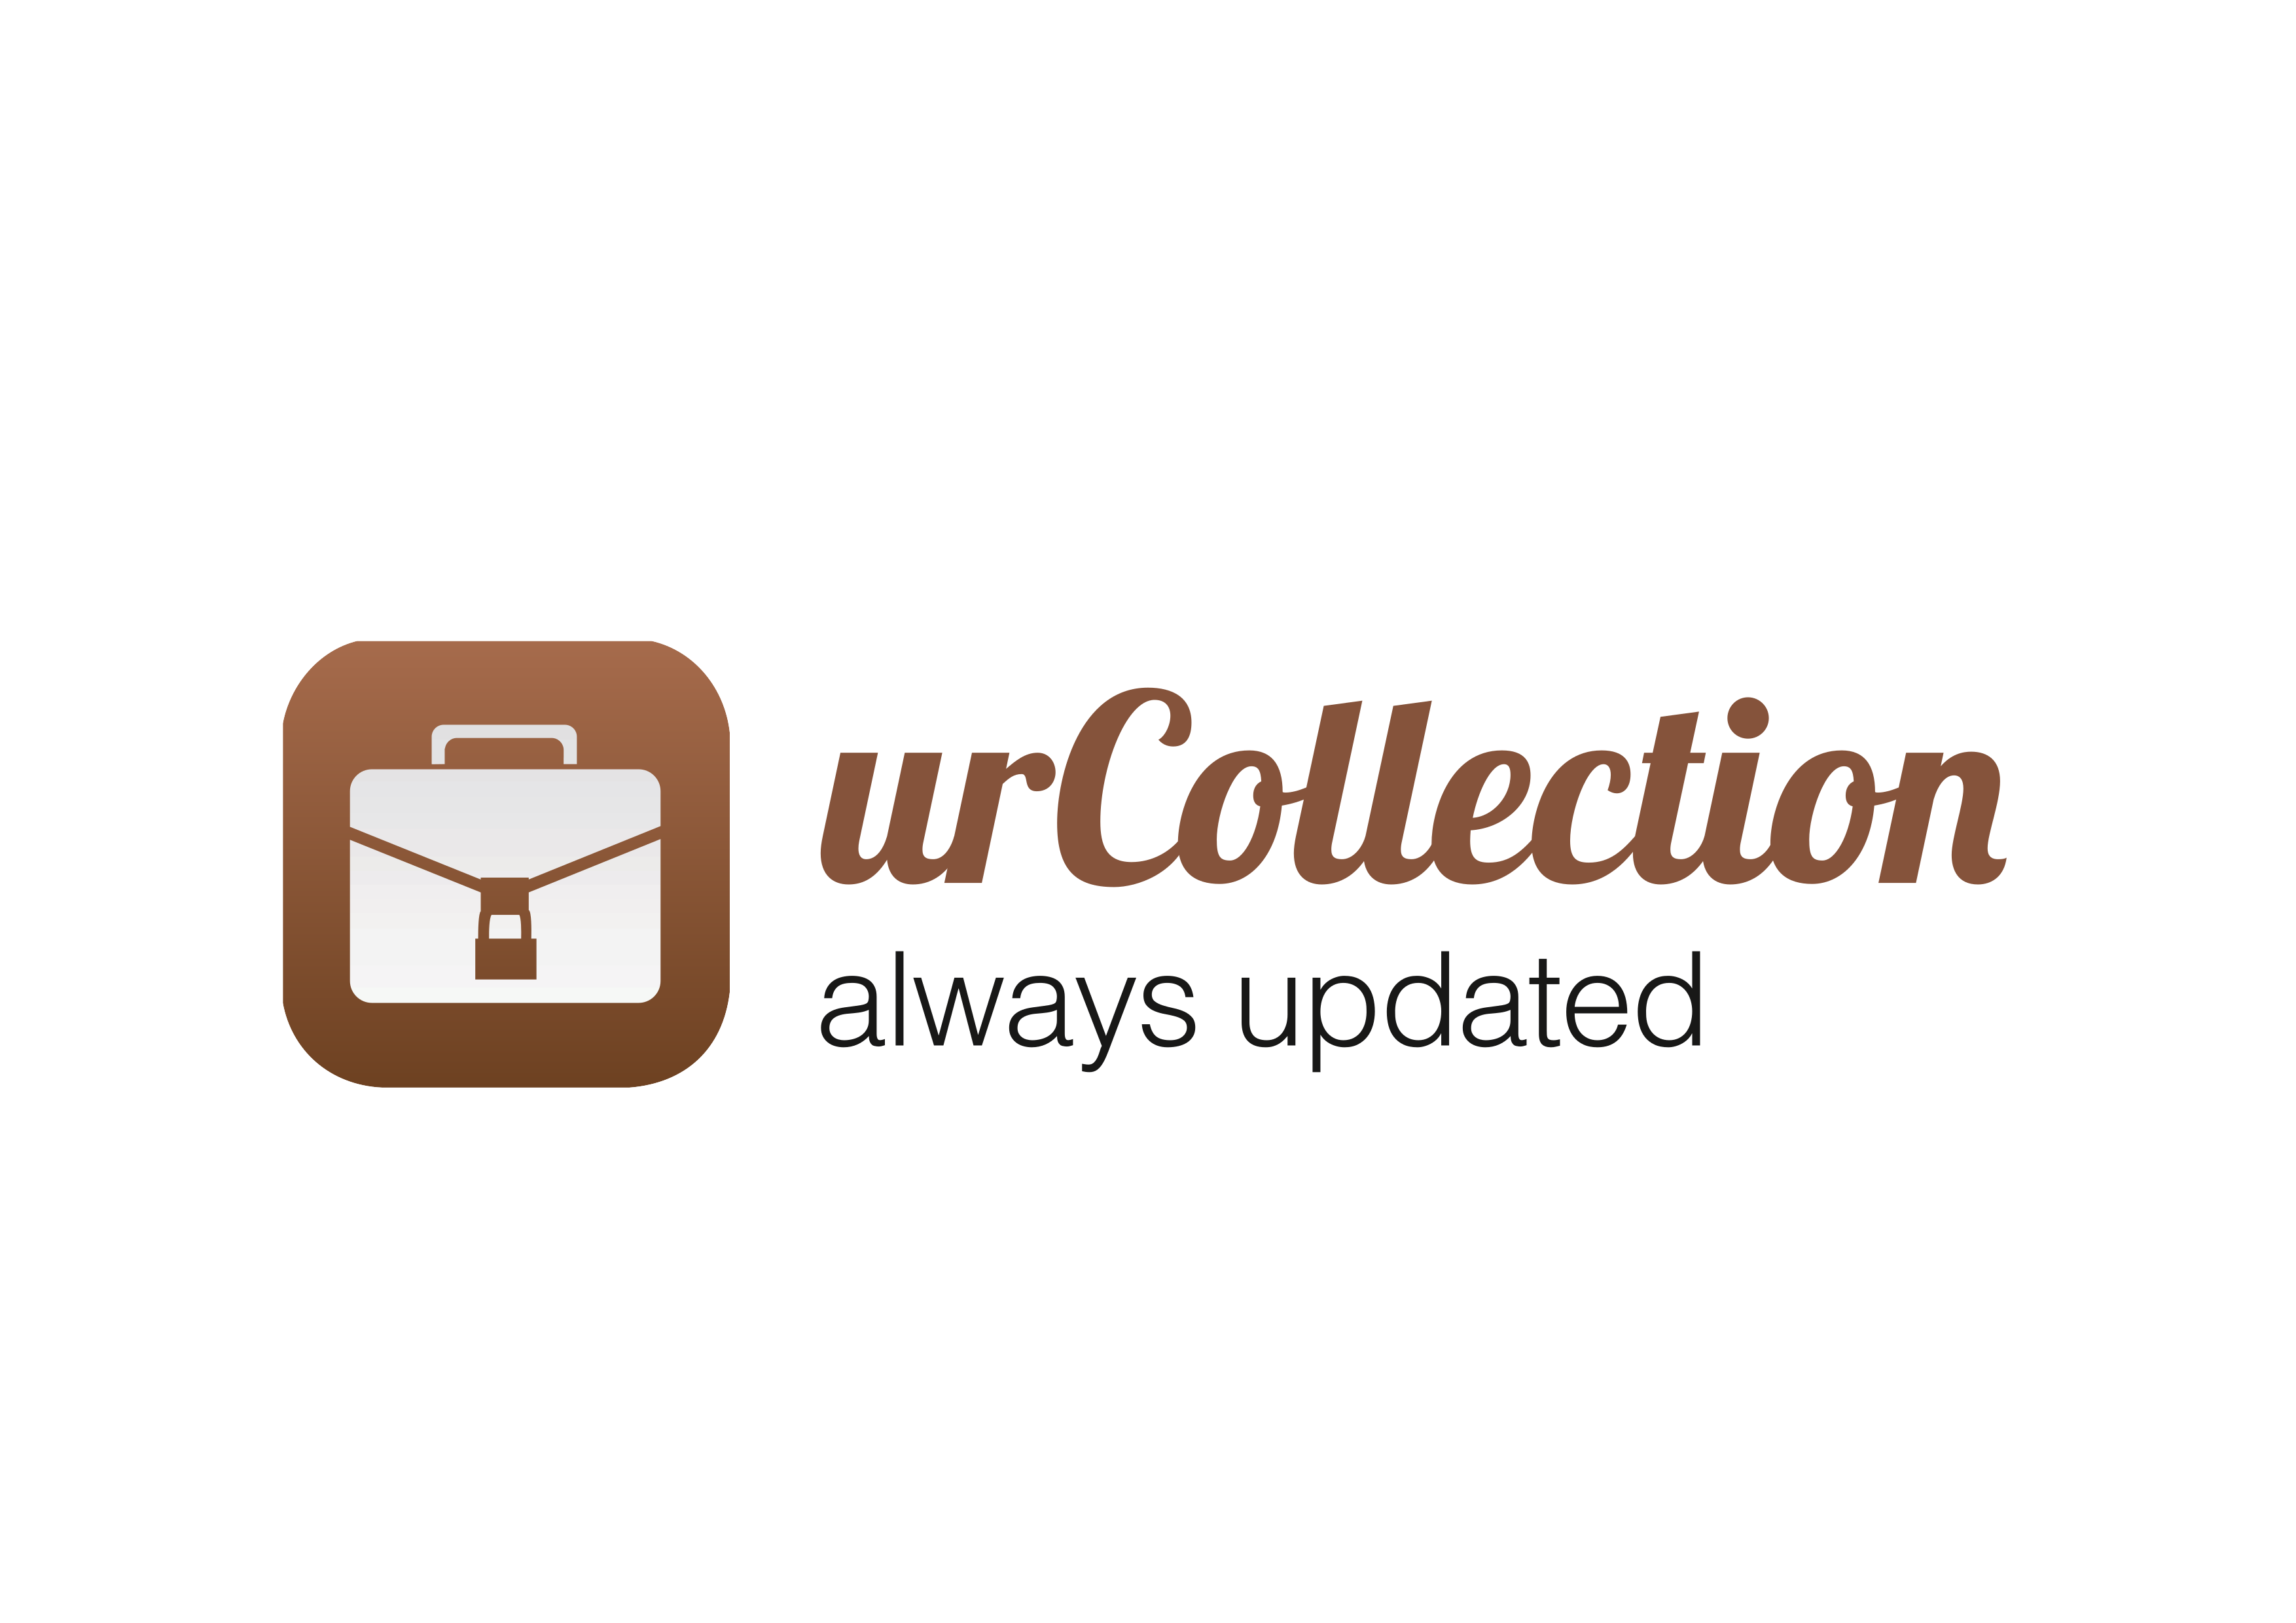 urCollection has an important range of customers which expect to find at the app the help to get a better management of their business' sales documents